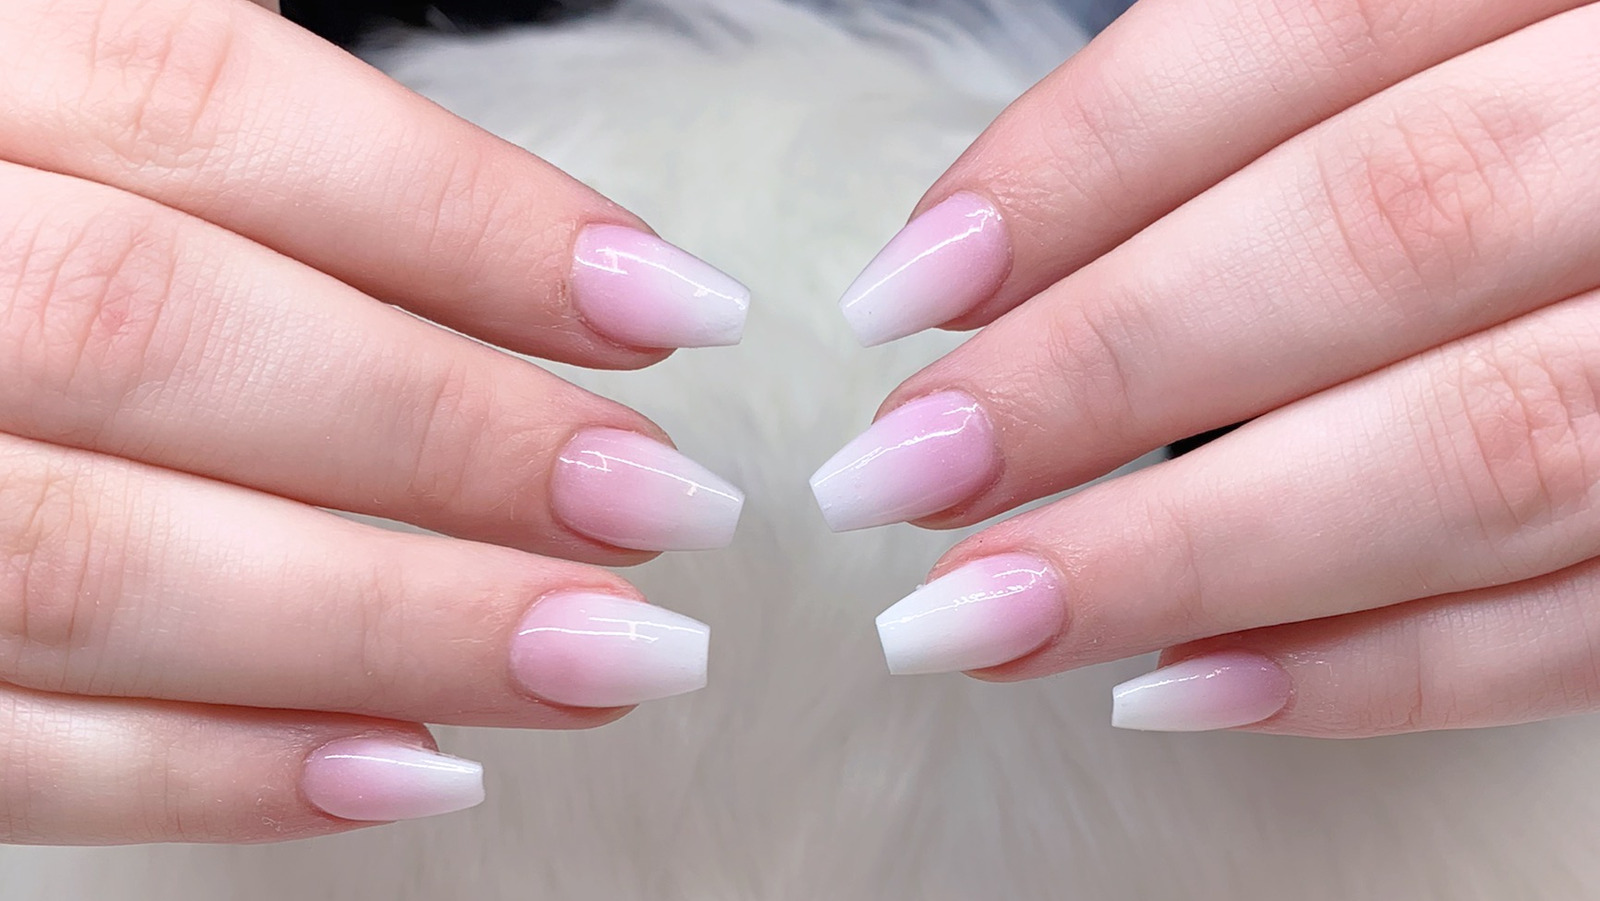 Here's How To Pull Off A Coffin Shape For Short Nails.